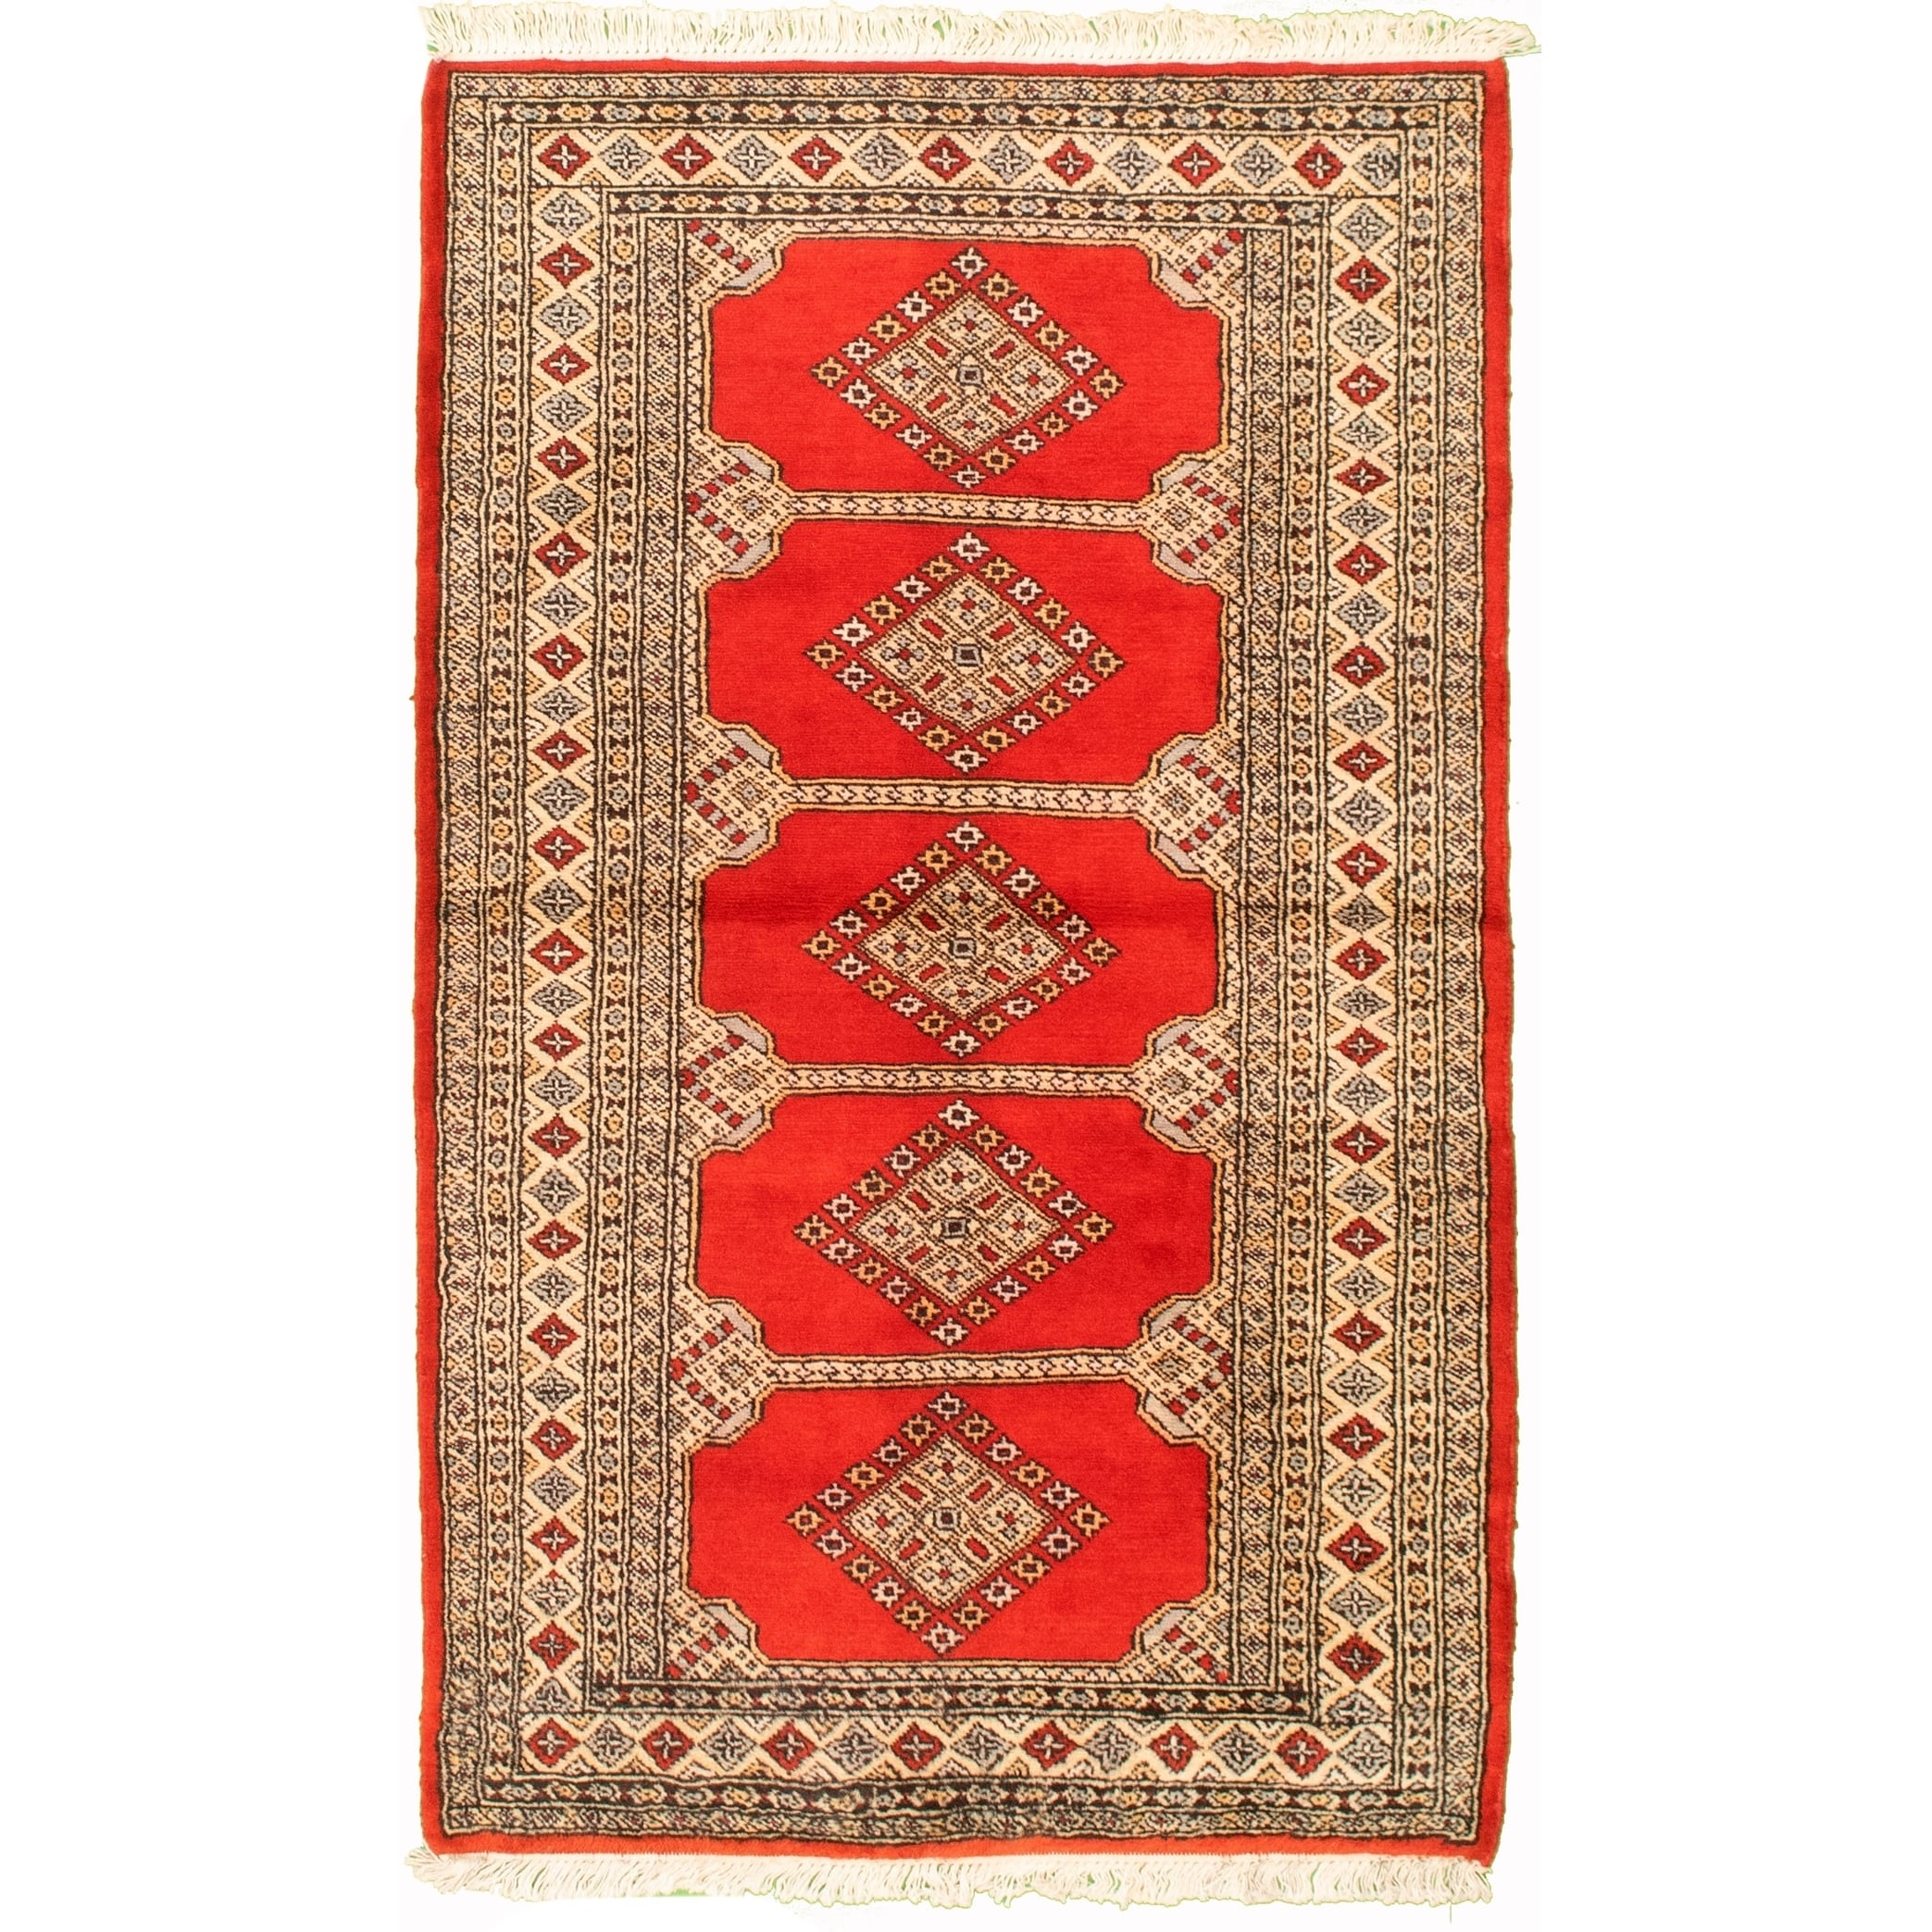 Finest Peshawar Bokhara Bordered Red Rug 3'2 x 5'1 Bedroom Hand-Knotted Wool Rug eCarpet Gallery Area Rug for Living Room 304762